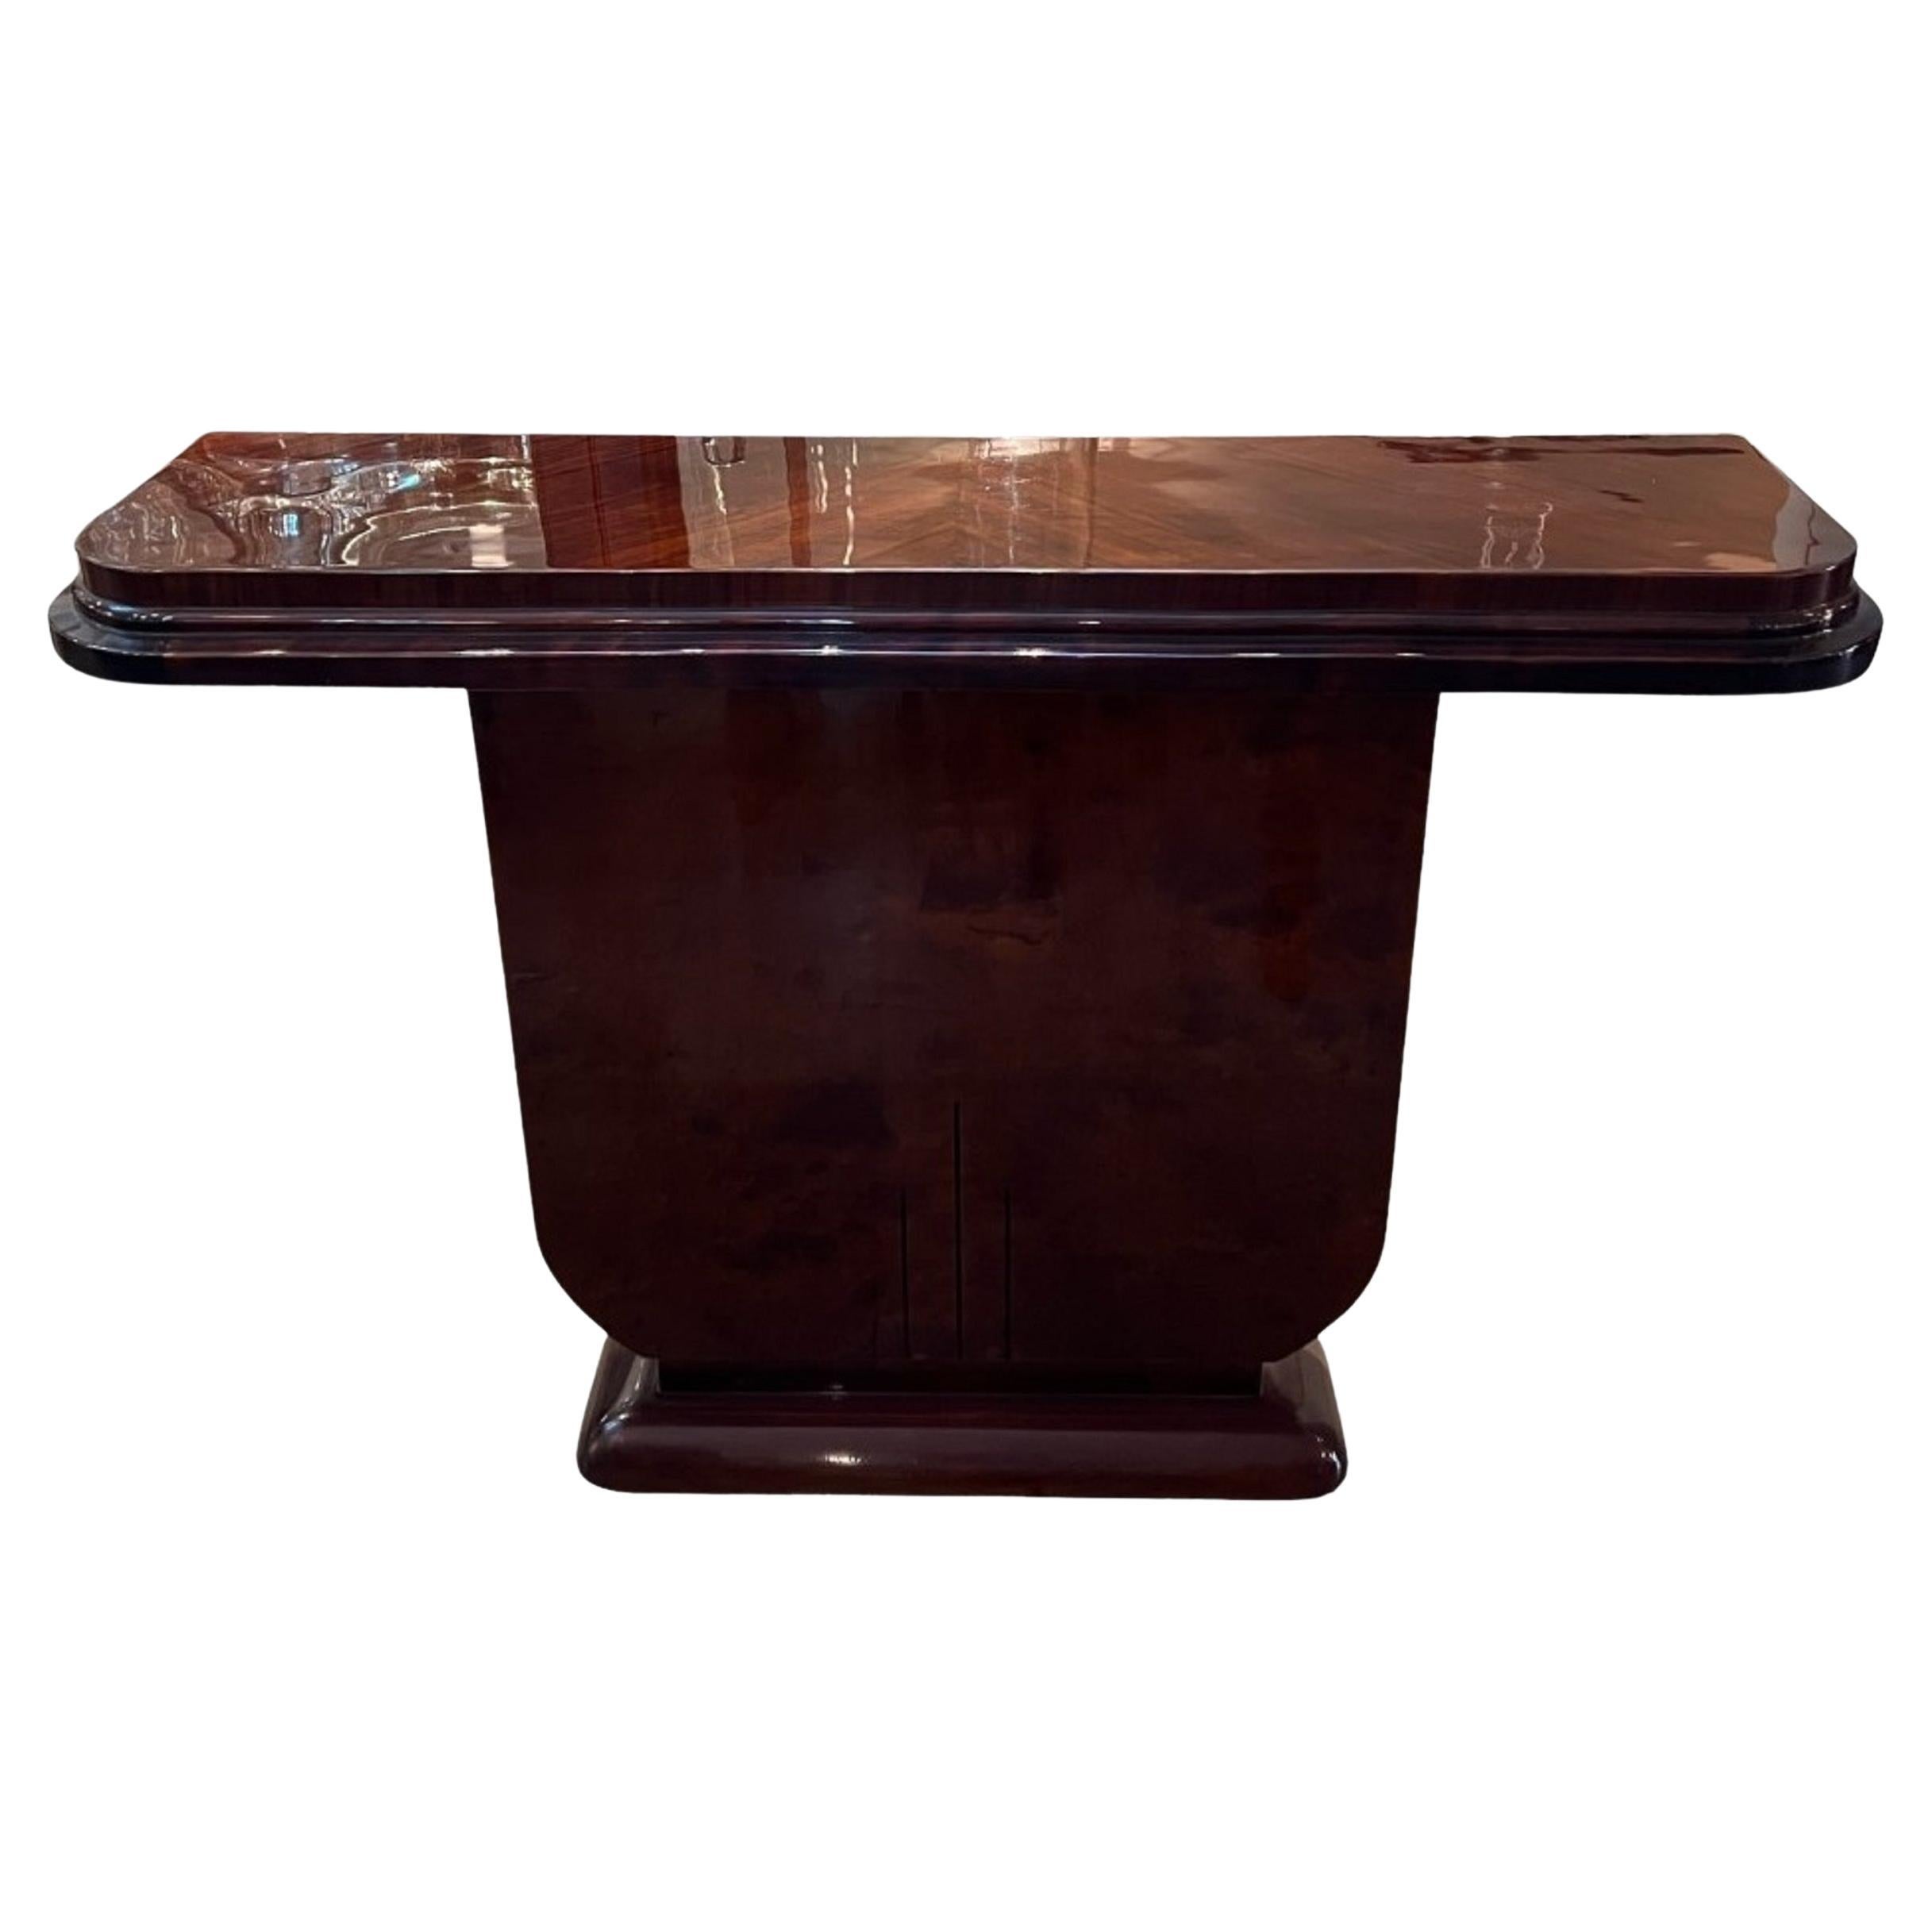 Console in Wood, France, 1920, Art Deco